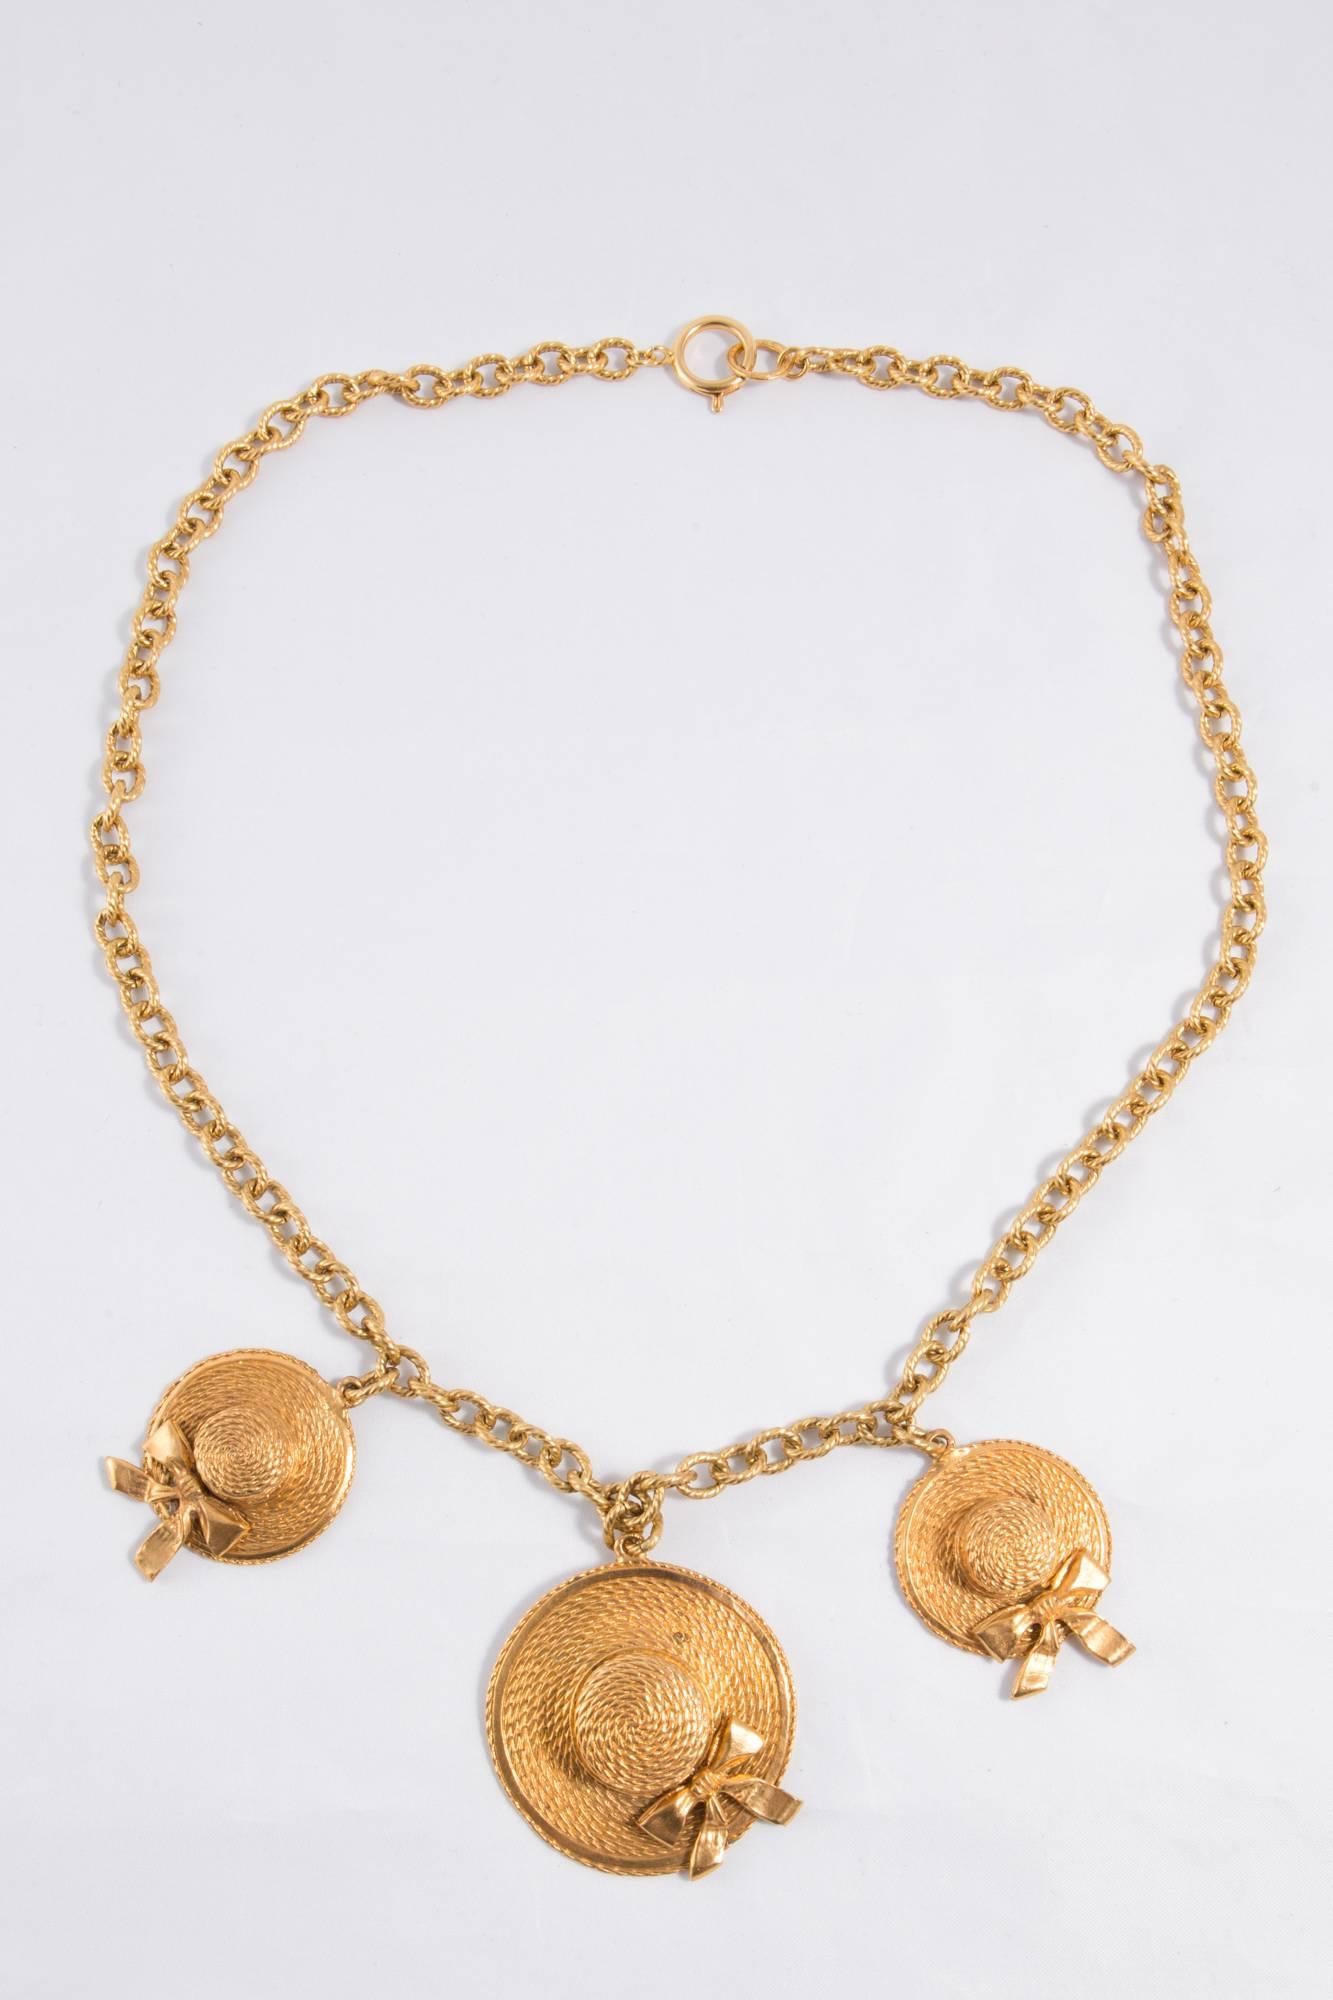 1980s iconic Chanel runaway gold tone straw hats necklace featuring 3 typical Chanel straw hats, a back Chanel plaque, a spring-ring fastening.  
In excellent vintage condition (please enlarge images to see all details on photos) 
Made in France. 